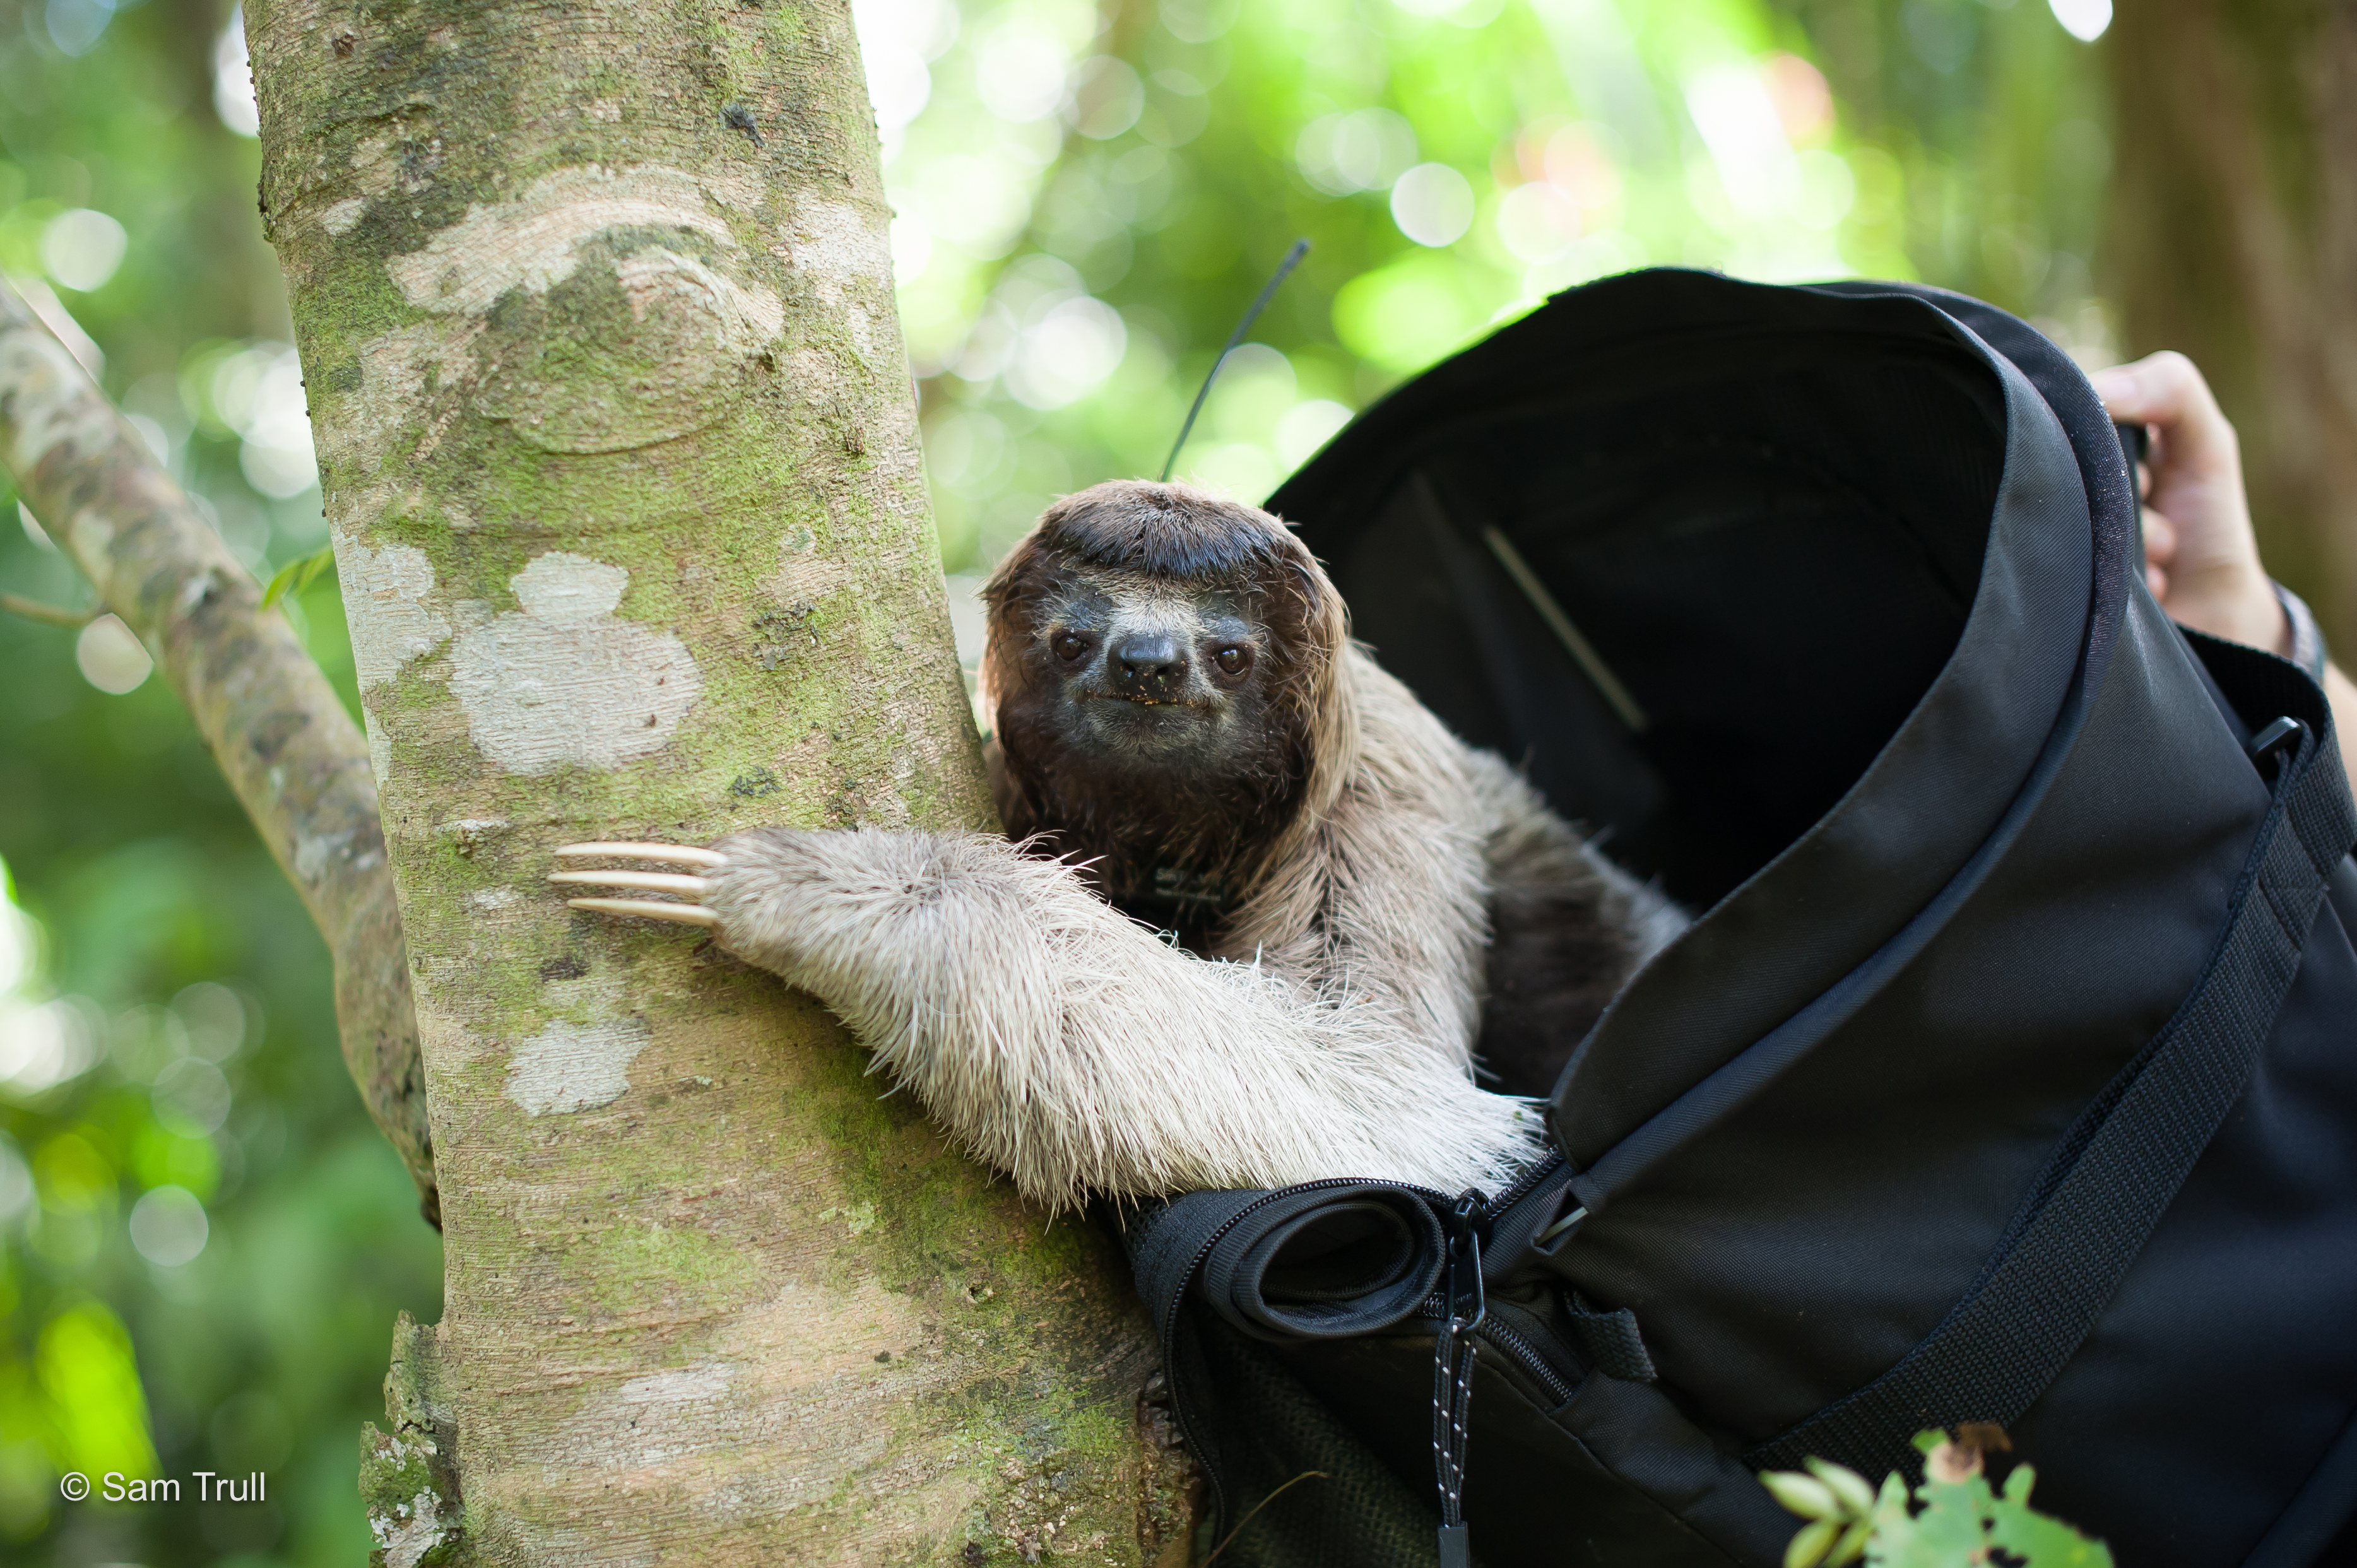 The Sloth Freedom Project